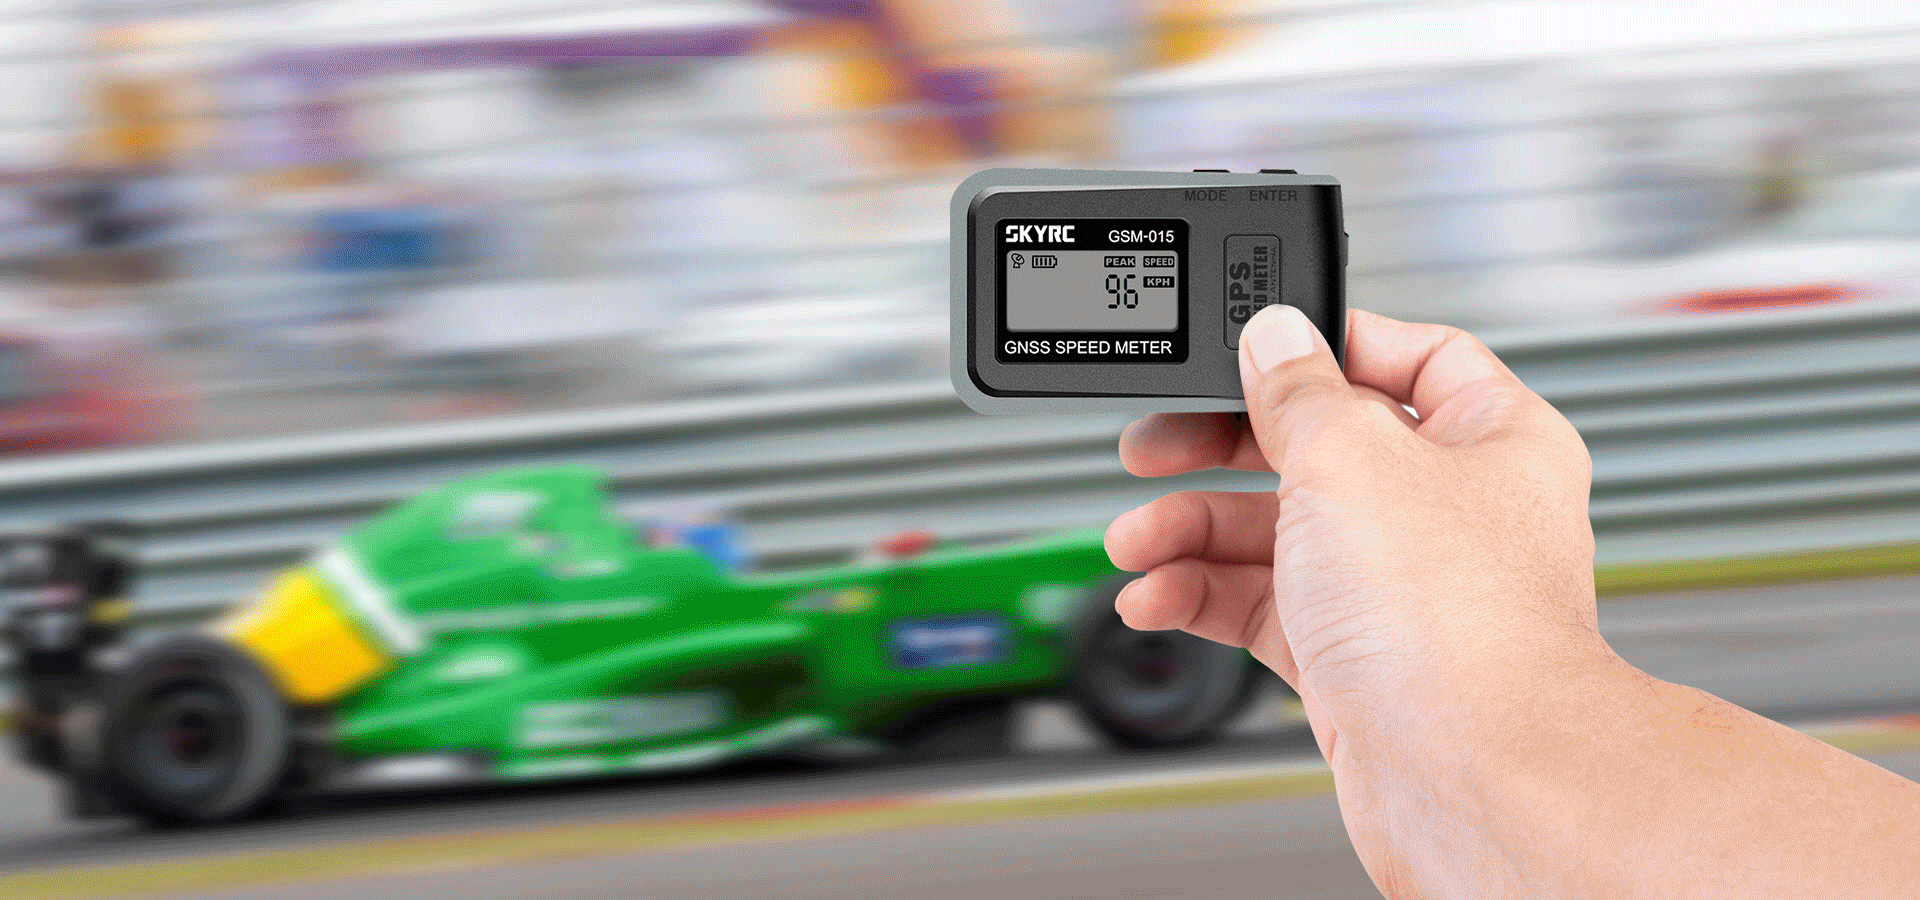 Presenting the SkyRC GPS/GNSS Speed Meter & Data Logger